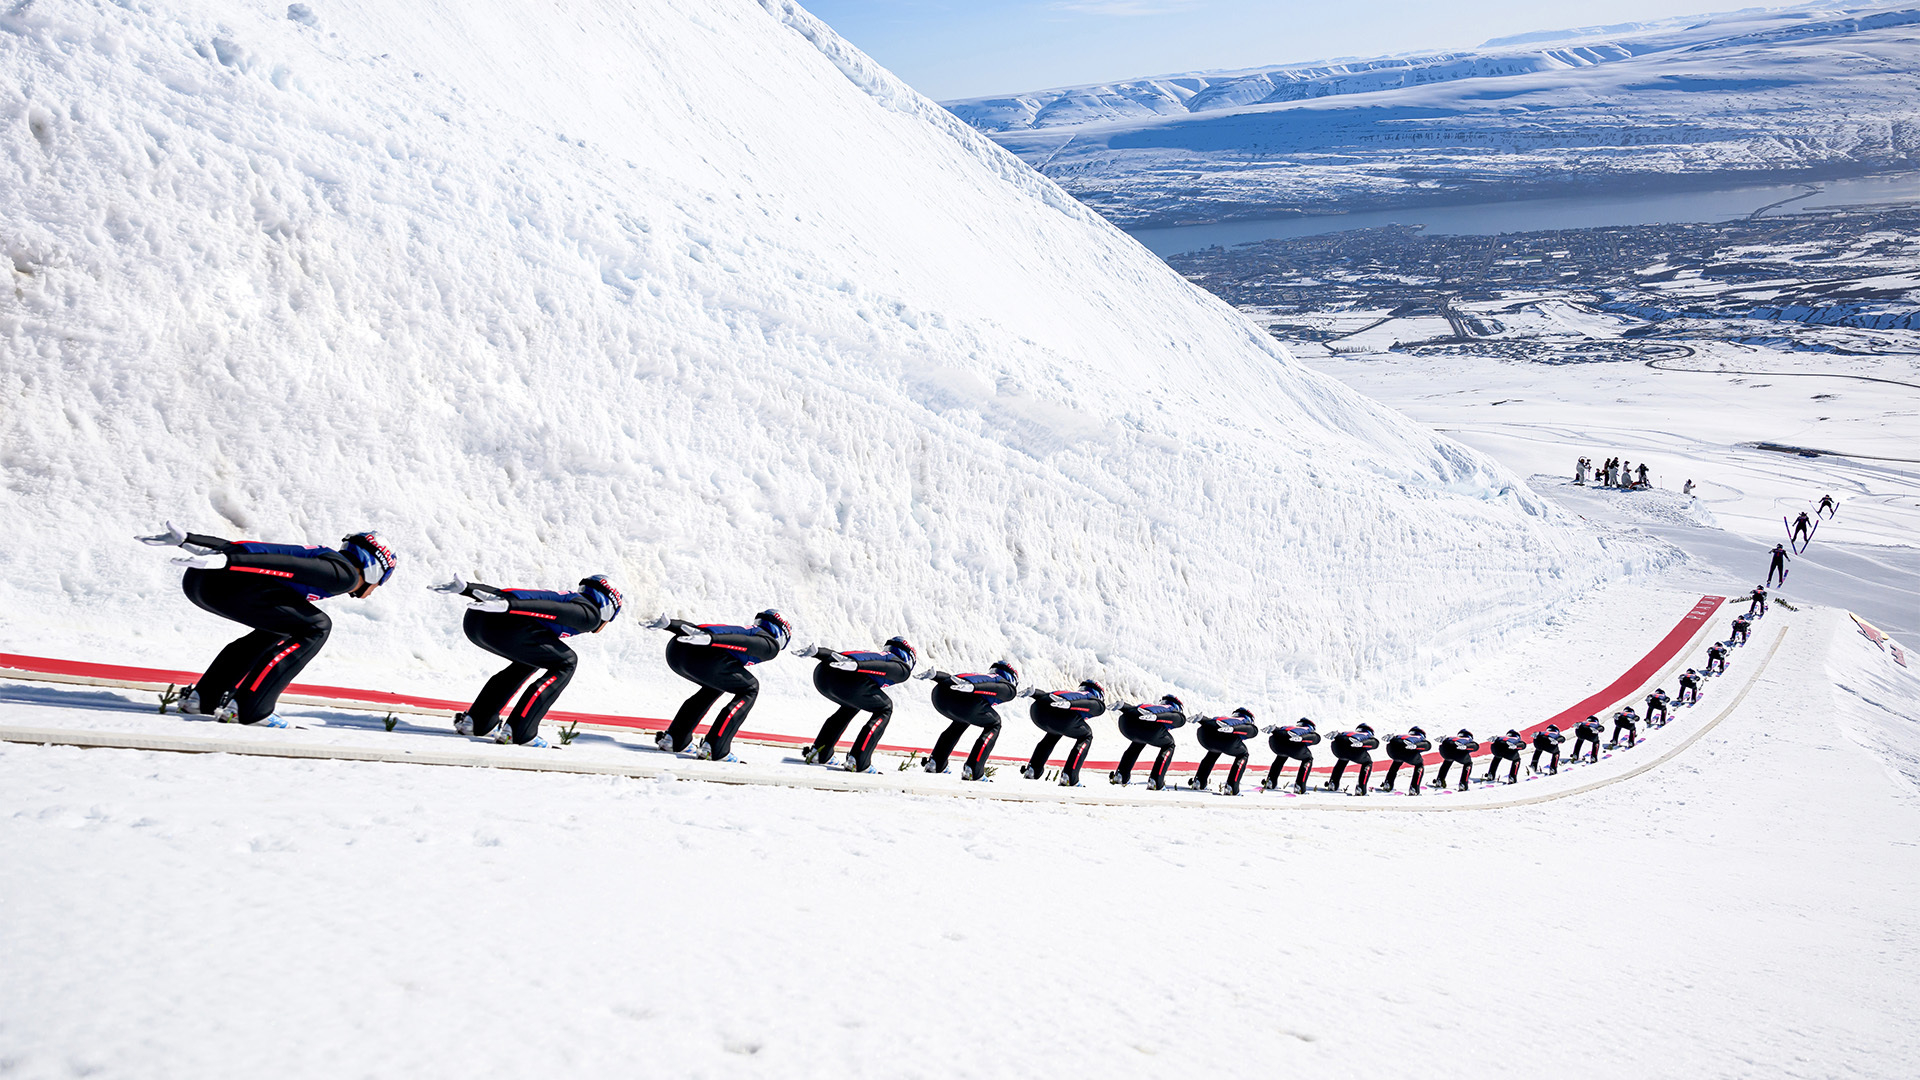 A line of skiers in a synchronized pose descending a snowy slope